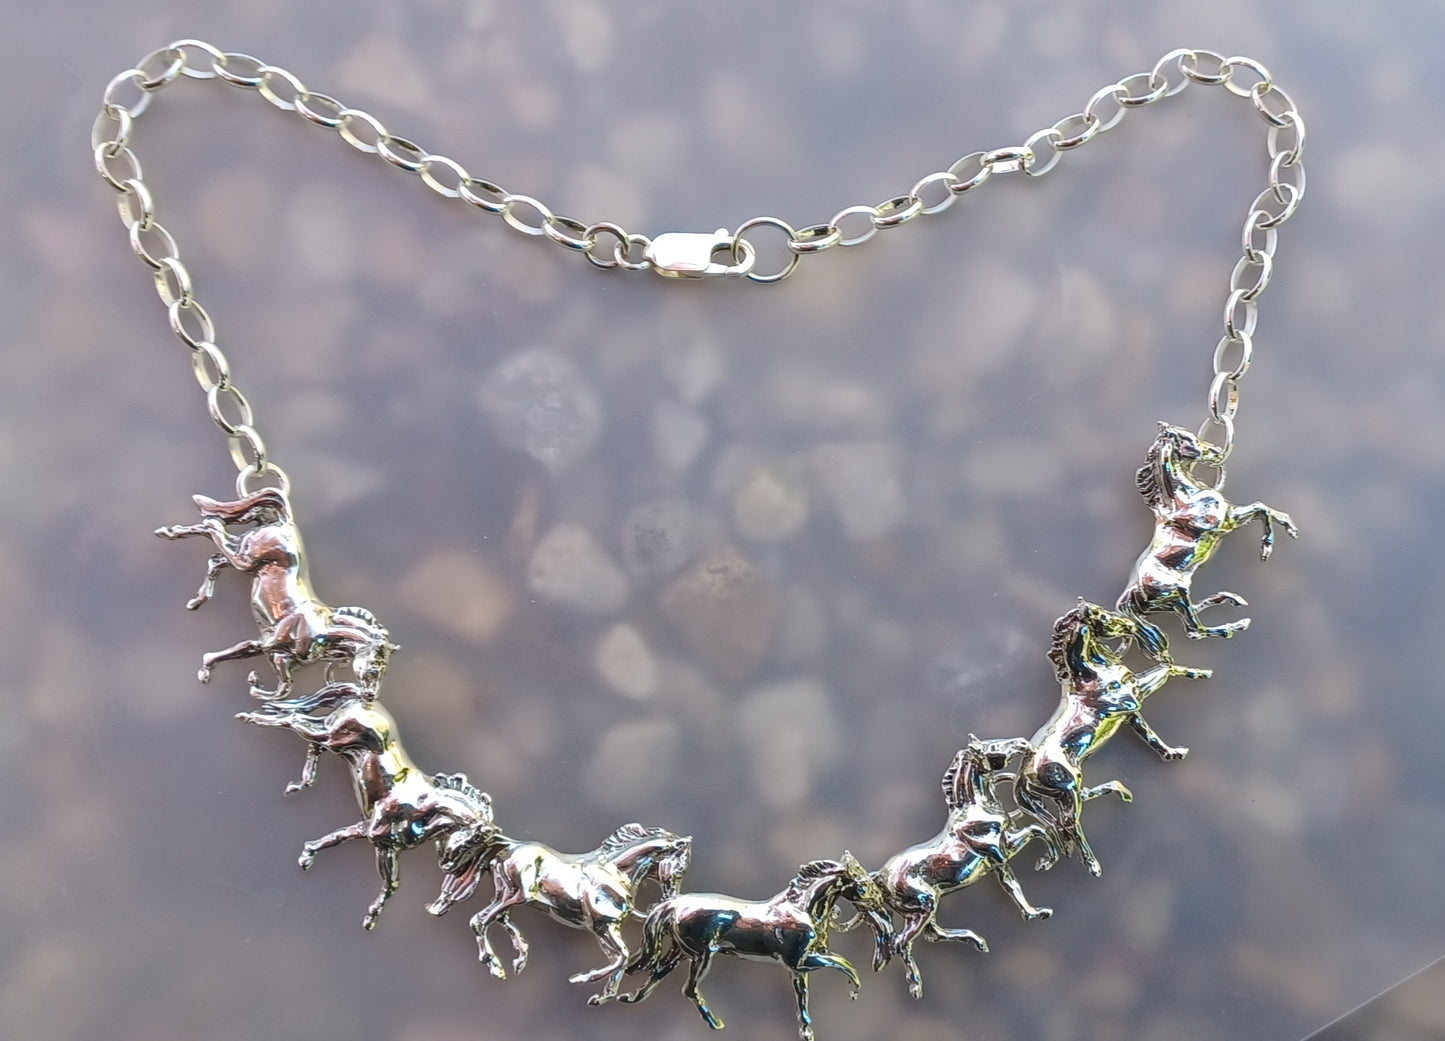 Impressive Horses Links Necklace with Heavy Sterling Silver Chain Artisan Masterpiece!